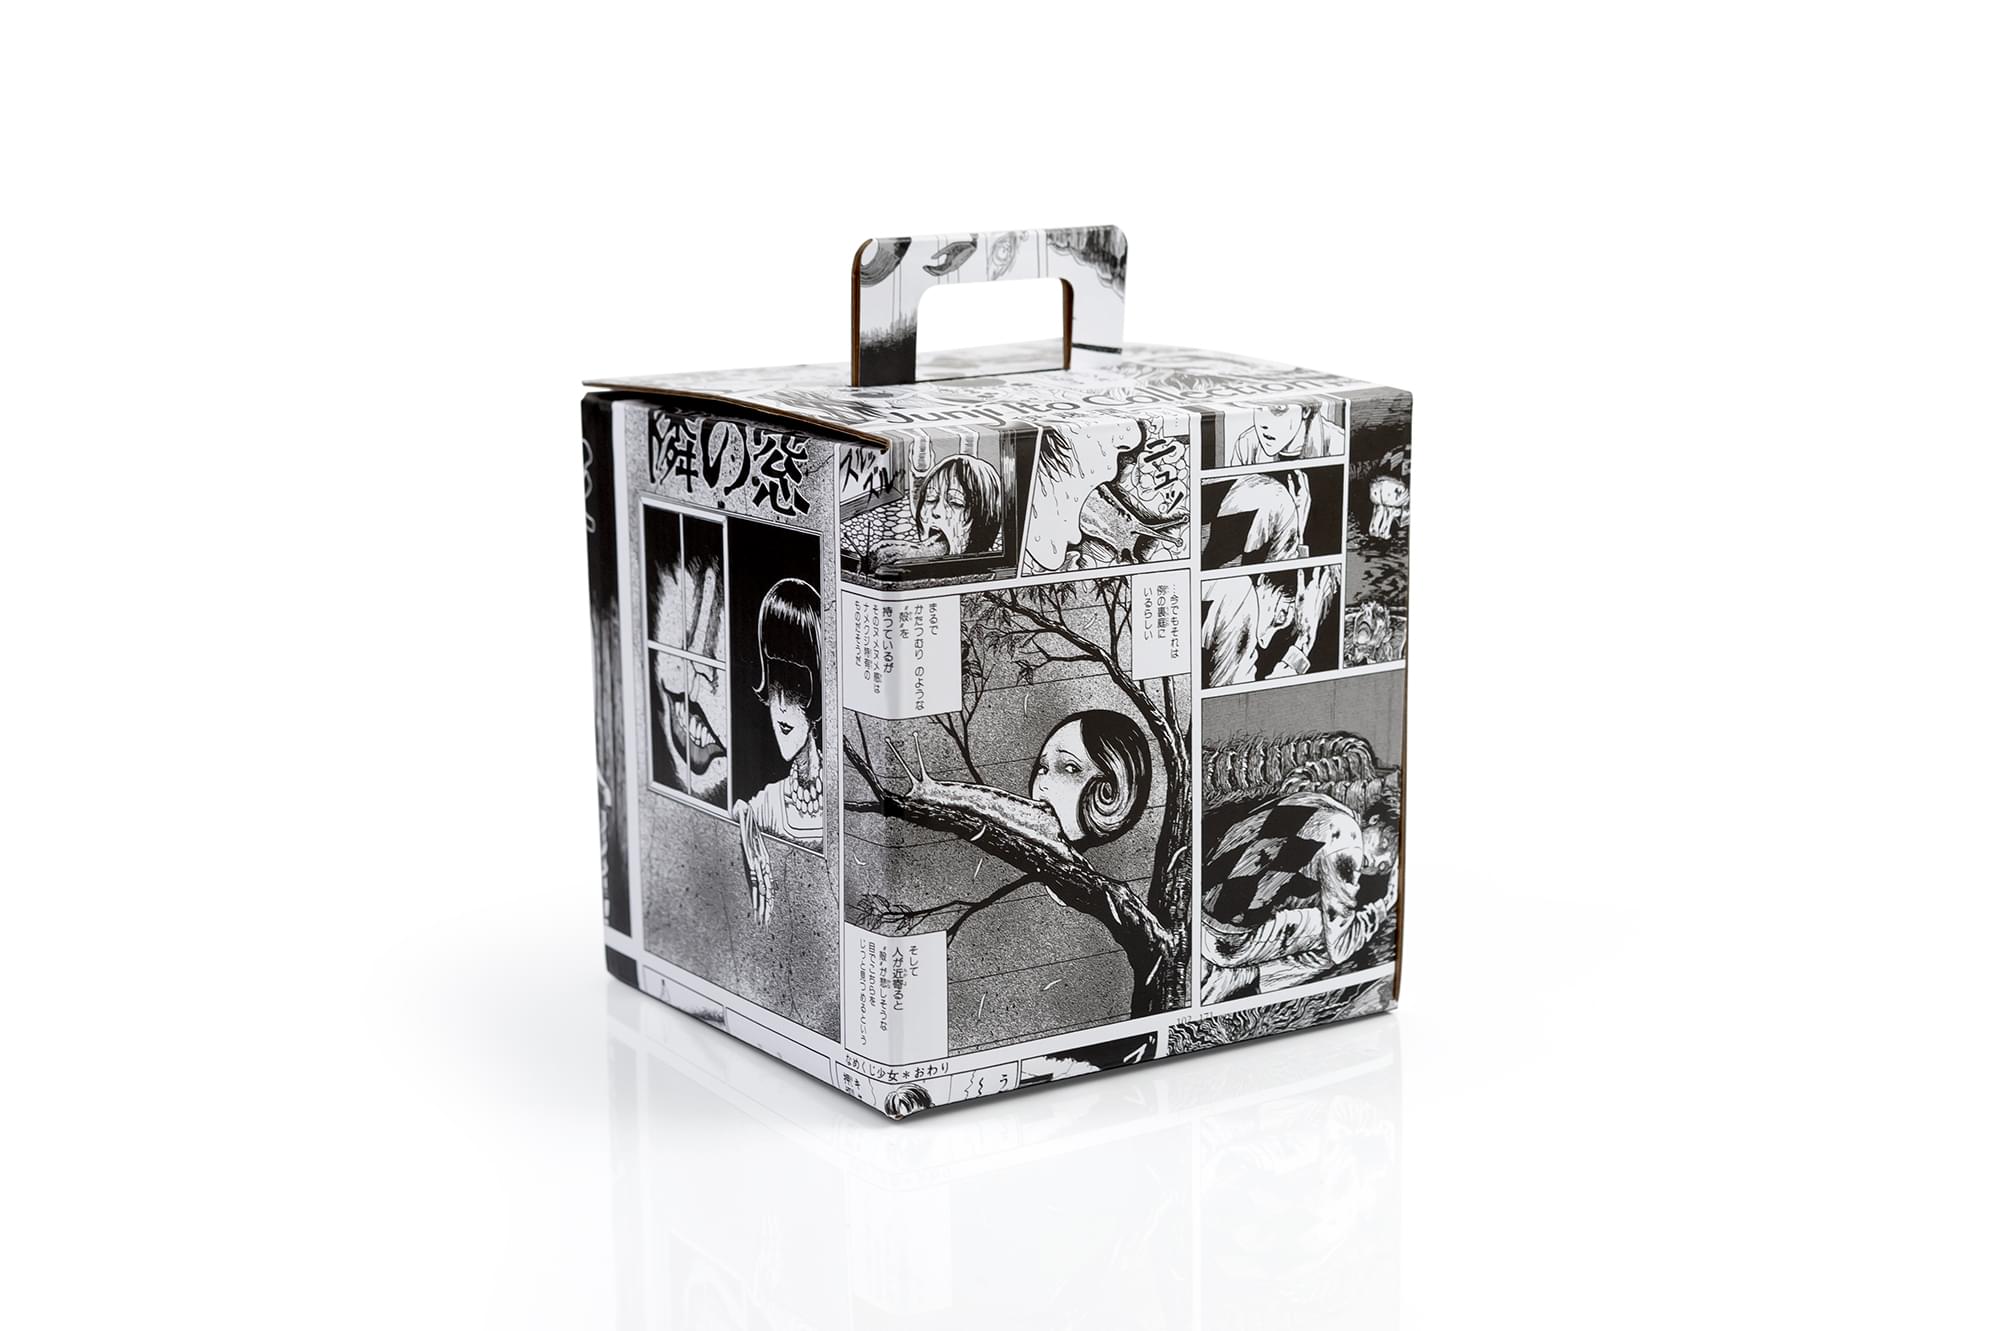  JUST FUNKY Junji Ito Collectors LookSee Box, Mystery Box  Collectors Items, Bundle of Anime Toys and Accessories, Fun Geeky Gift  Box